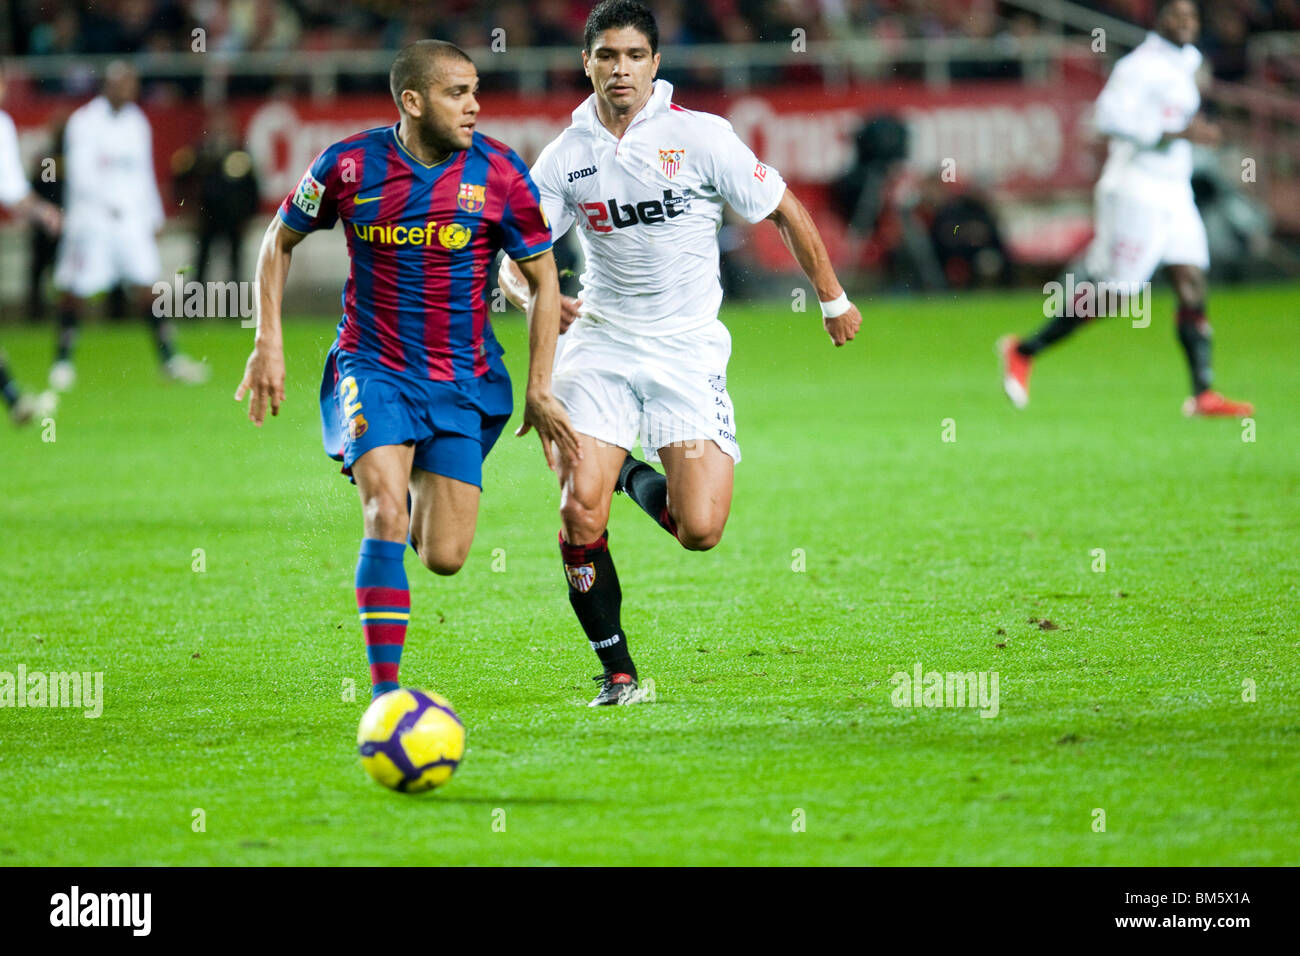 Daniel Alves with the ball pursued by Renato. Stock Photo